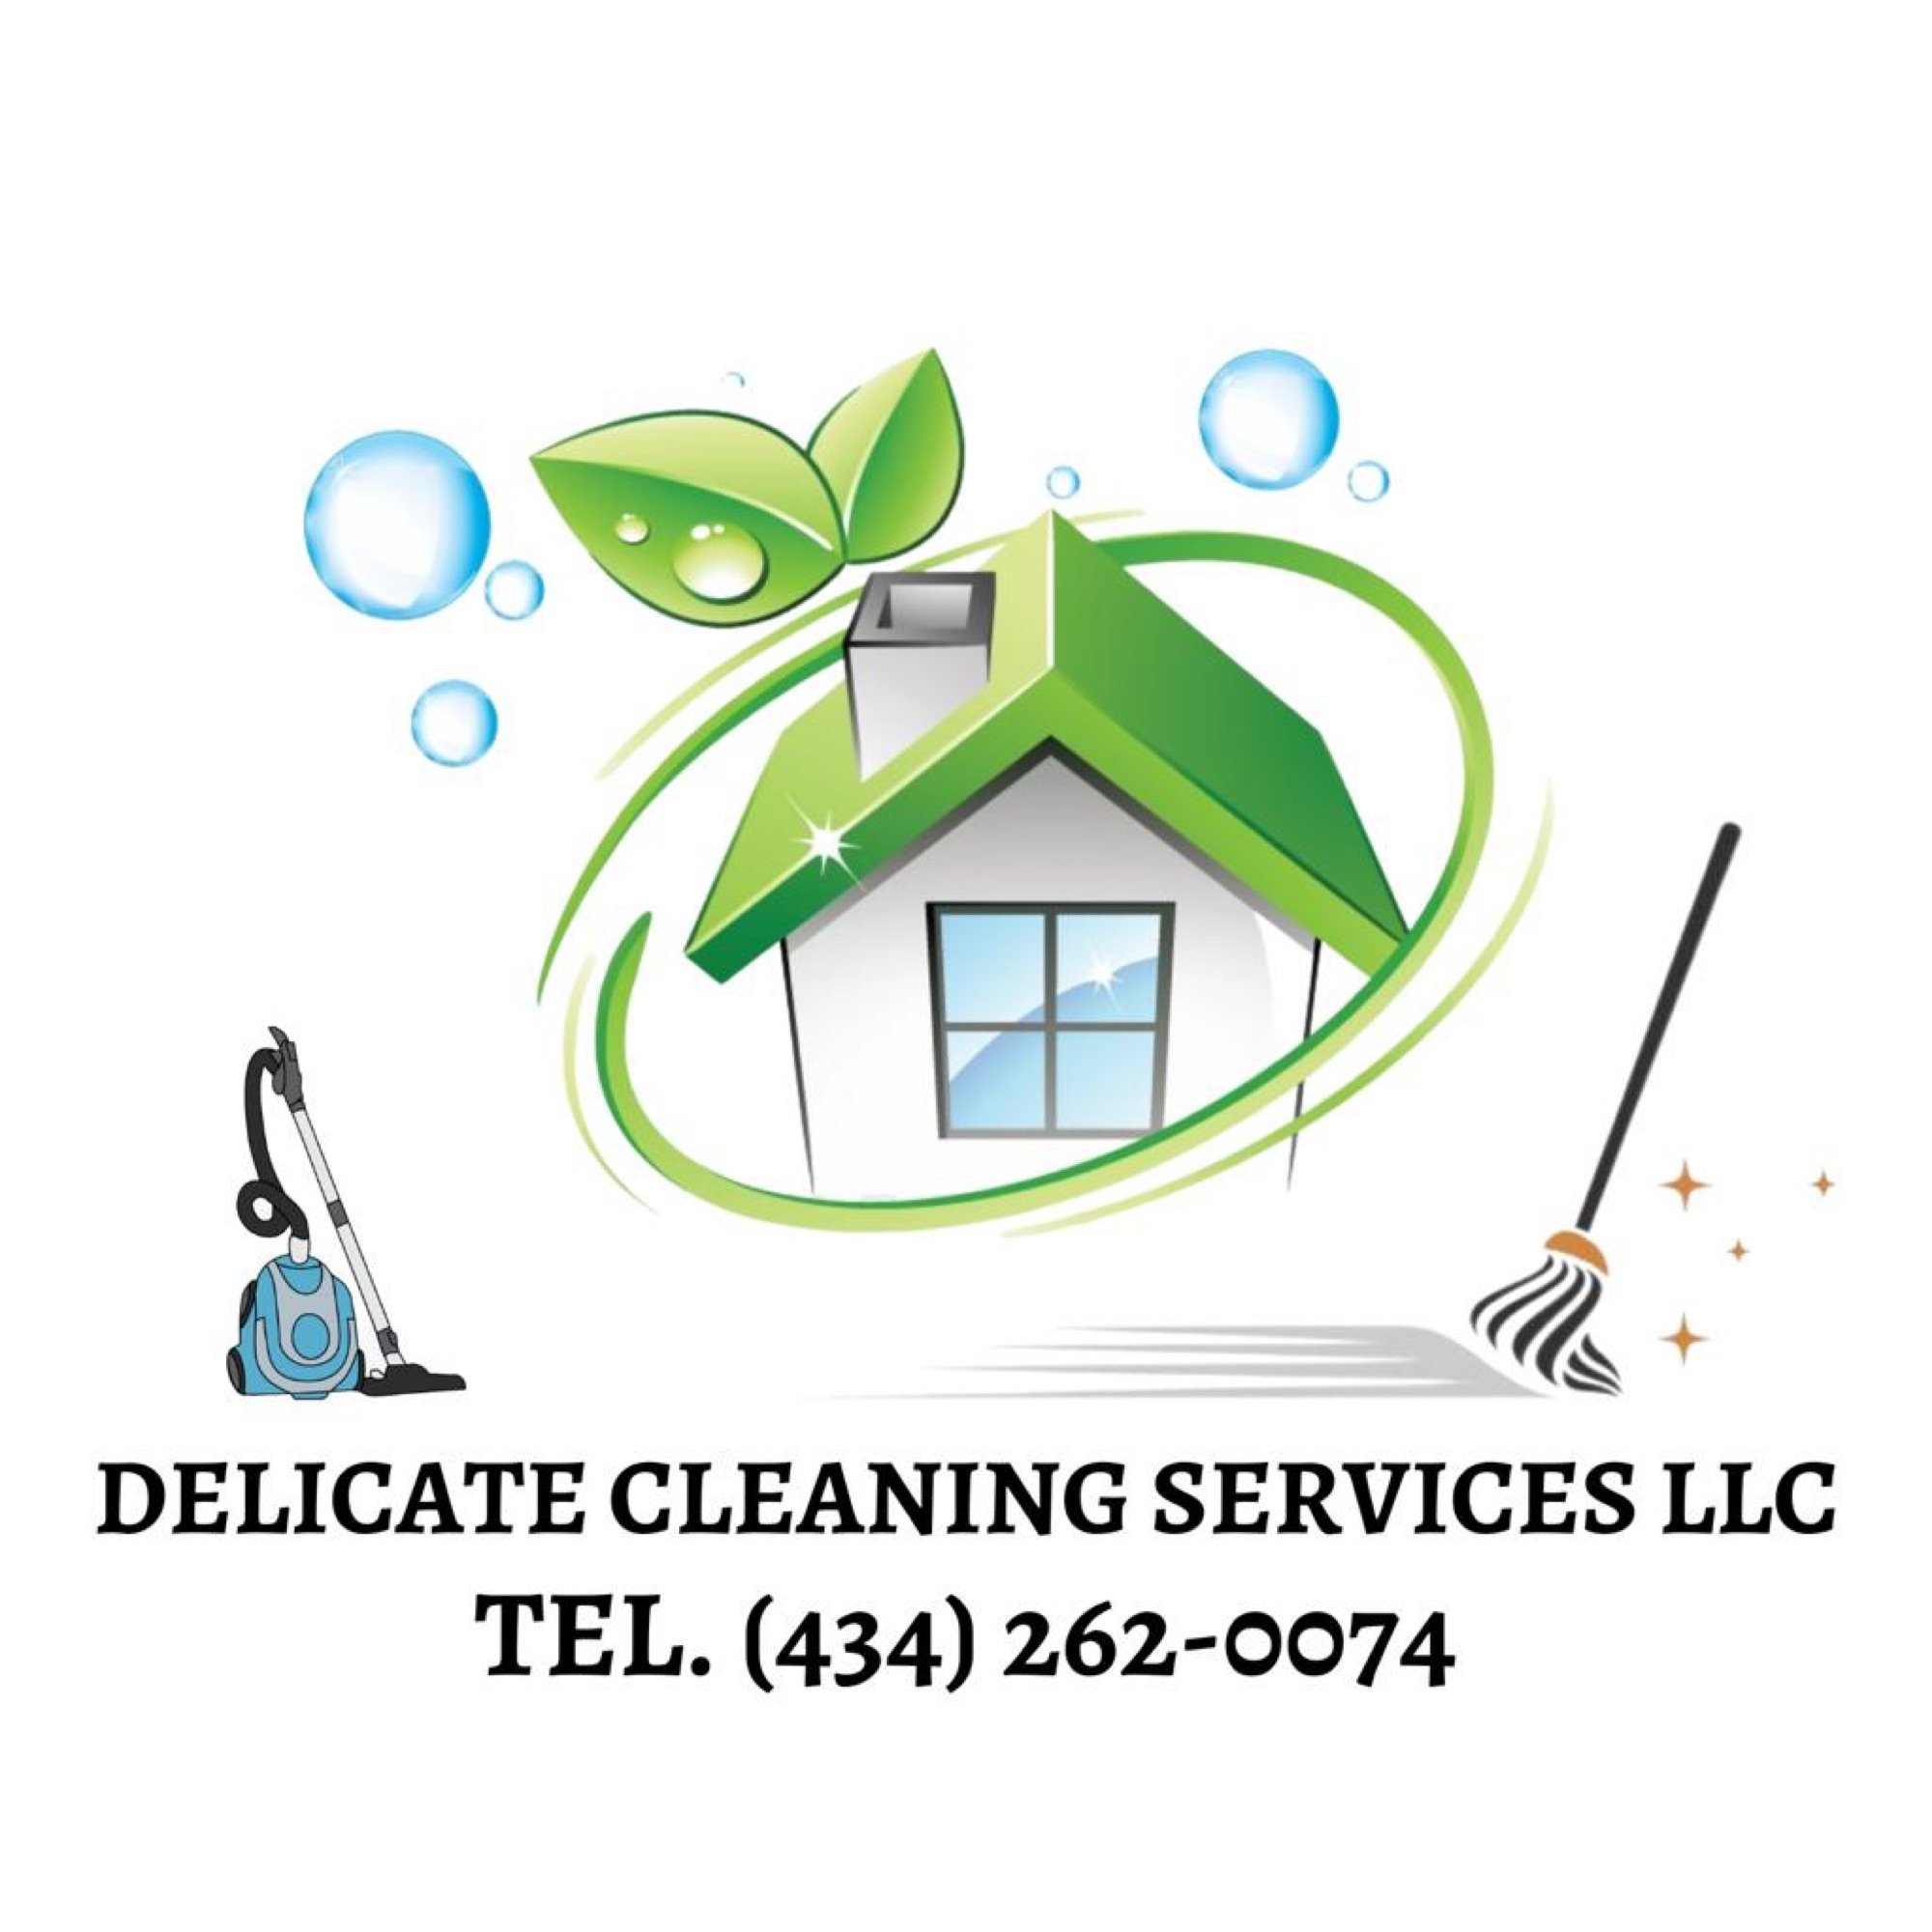 Delicate Cleaning Services, LLC Logo